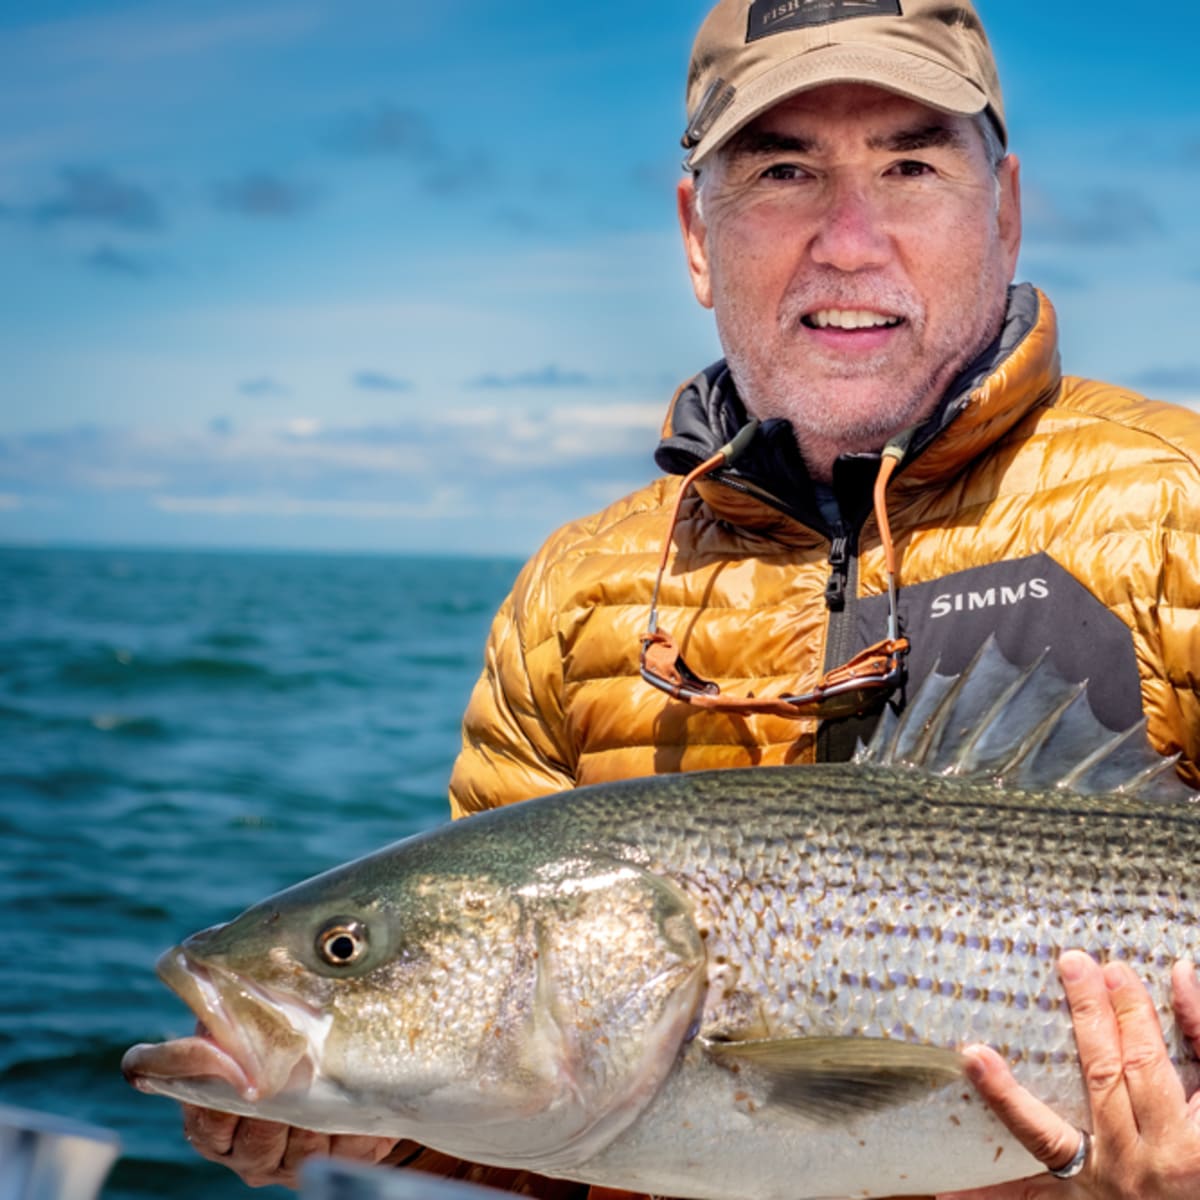 Catching Monster Striped Bass Fly Fishing - Men's Journal